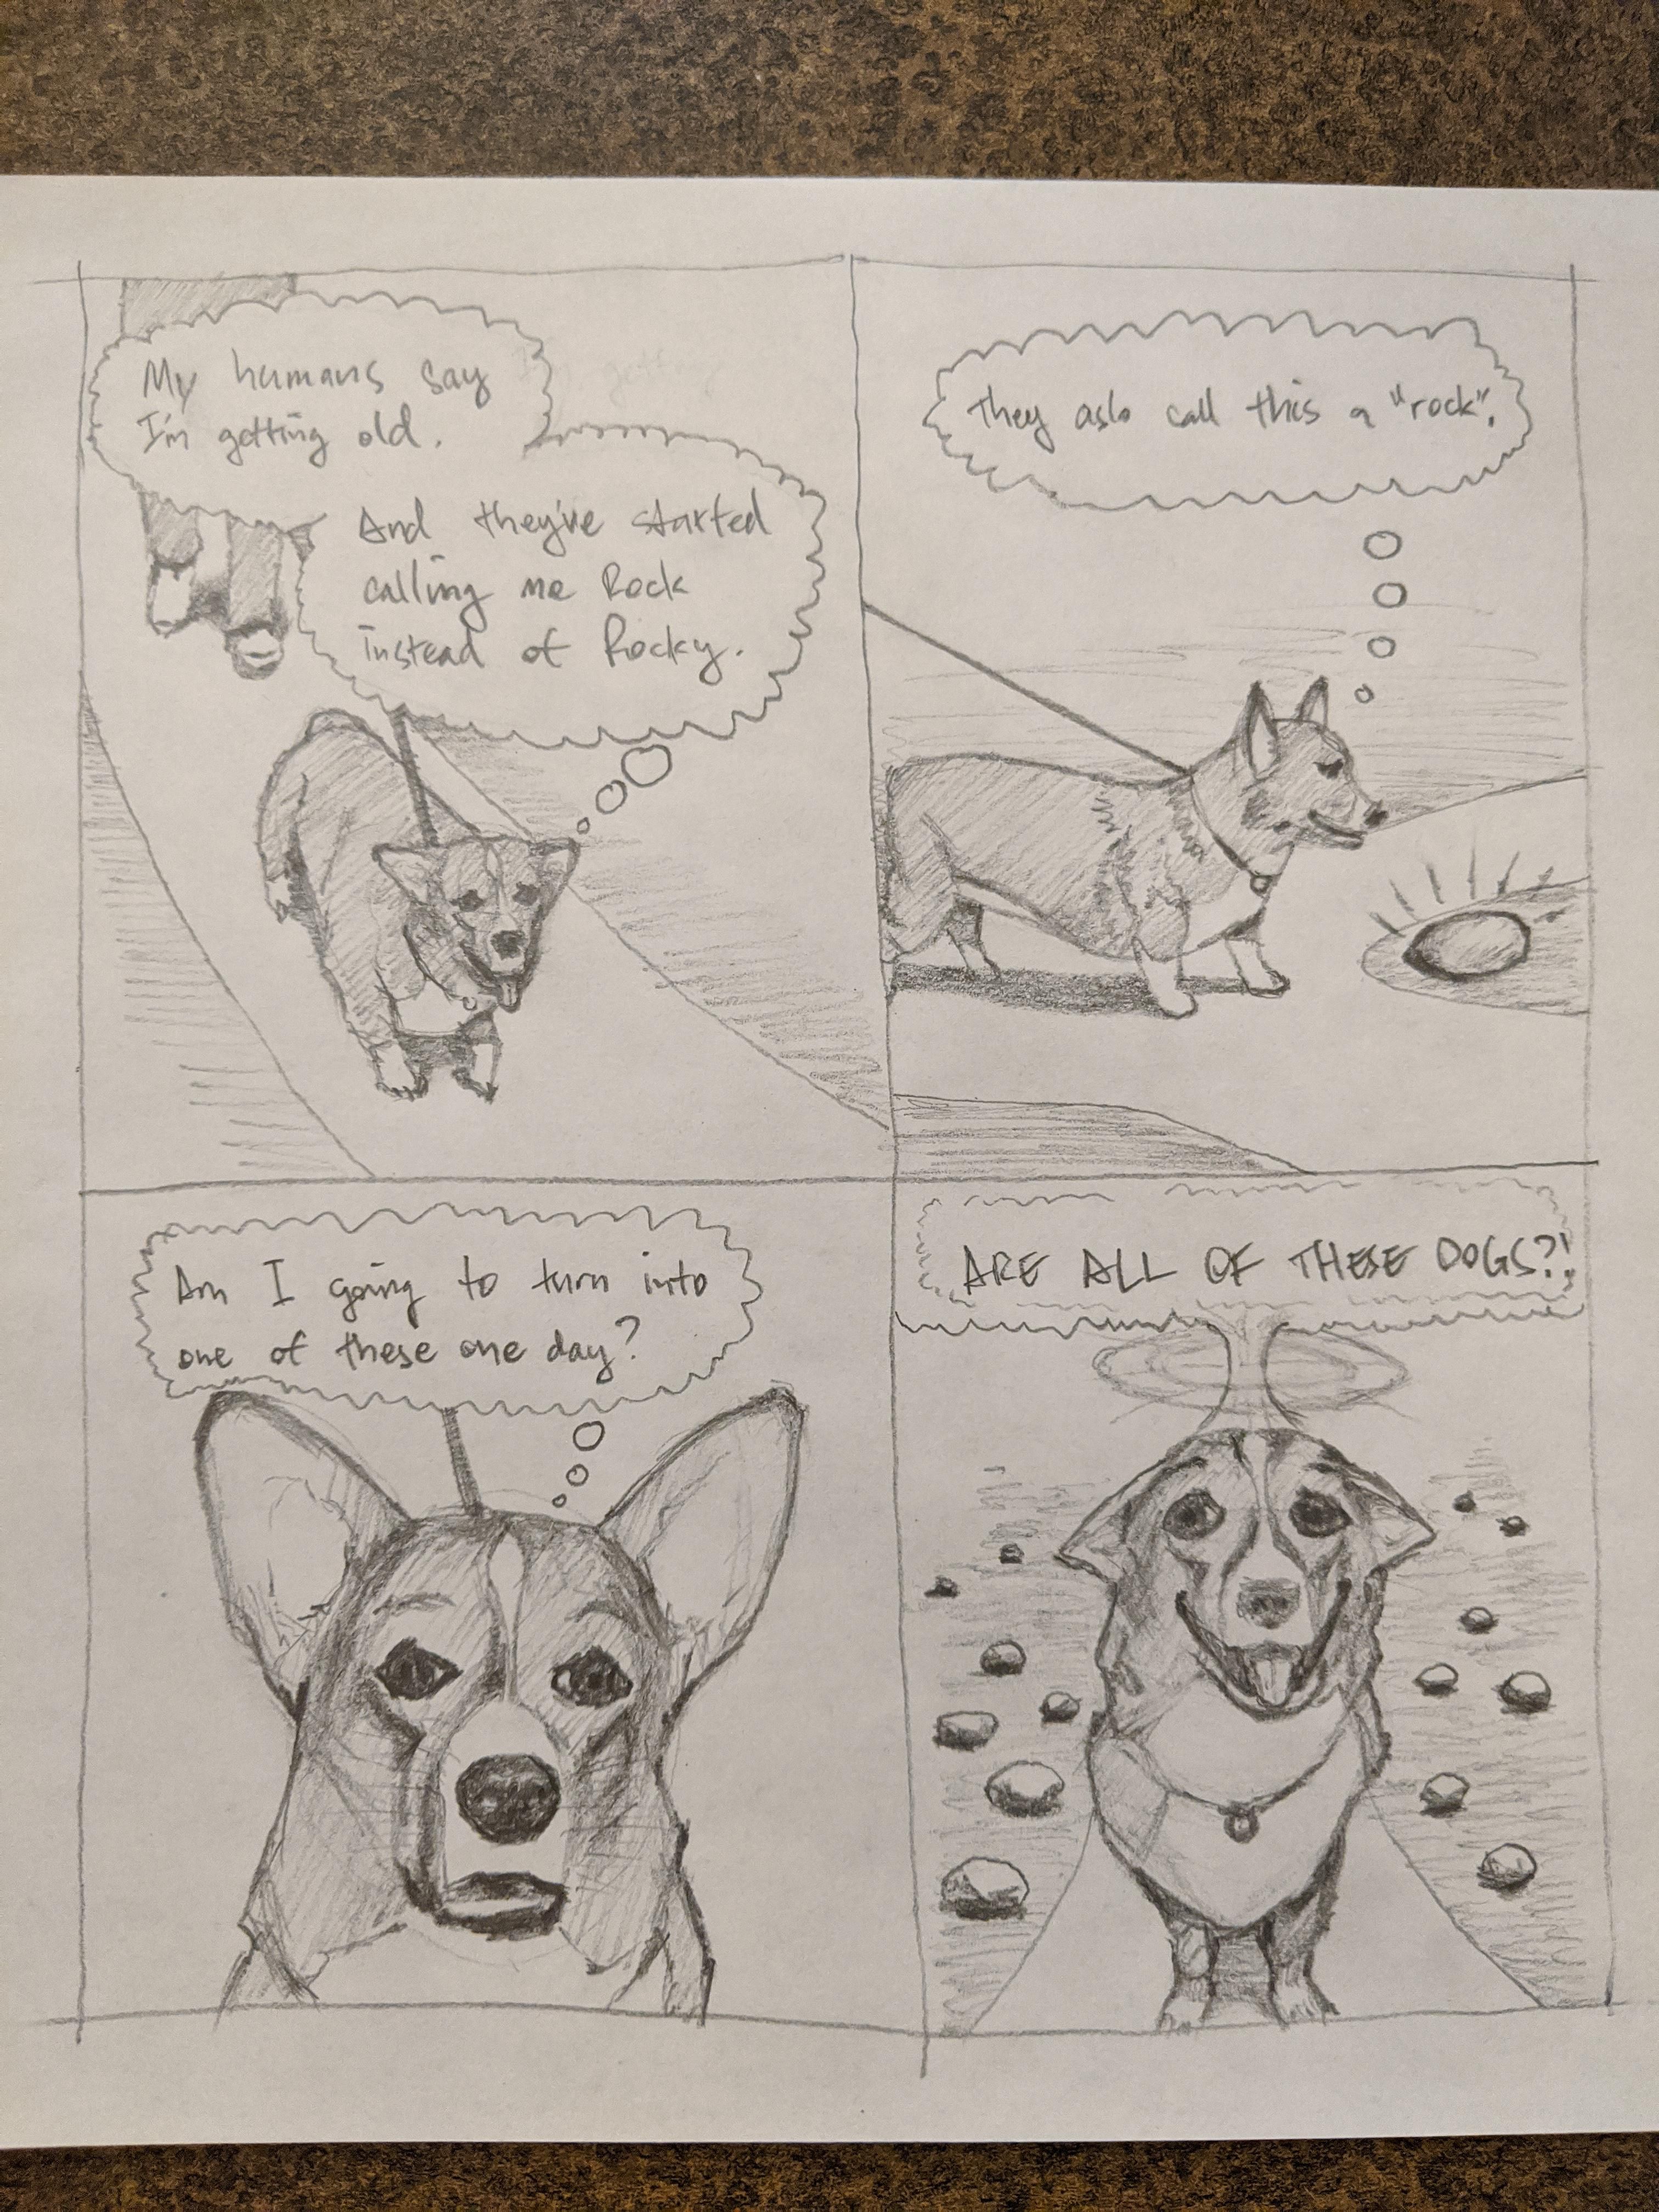 My dog is getting older, so I drew this comic to explain the afterlife.